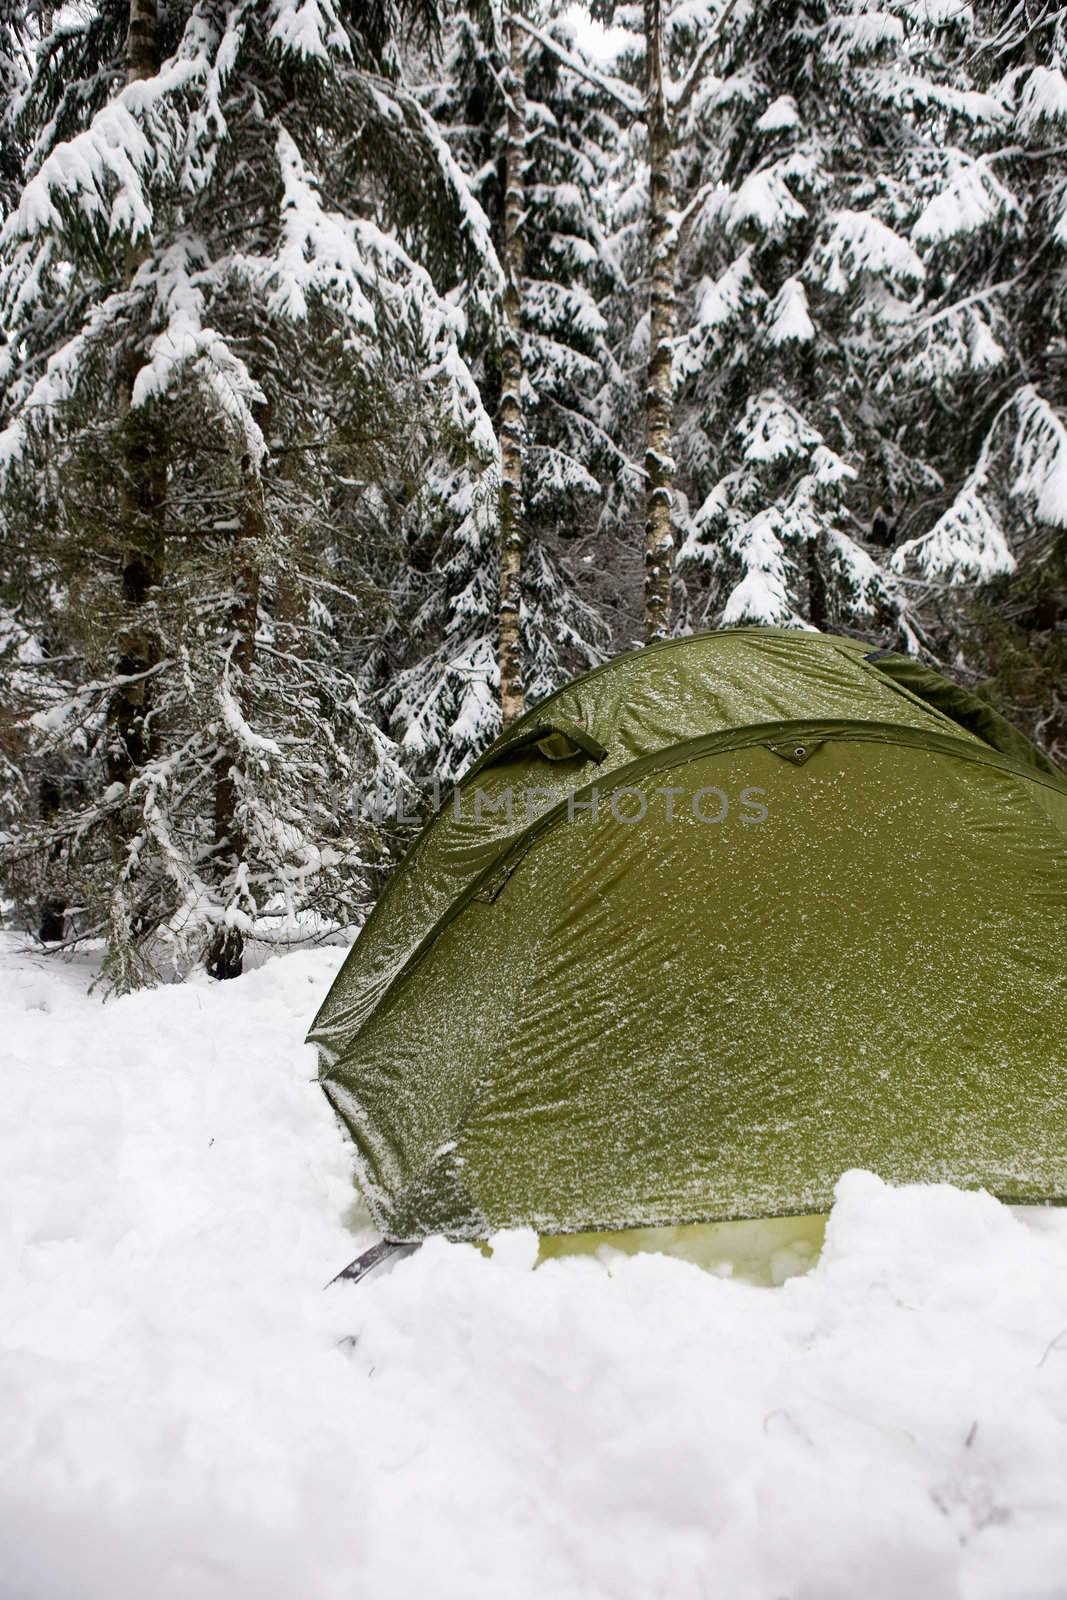 Tent in Snow by leaf